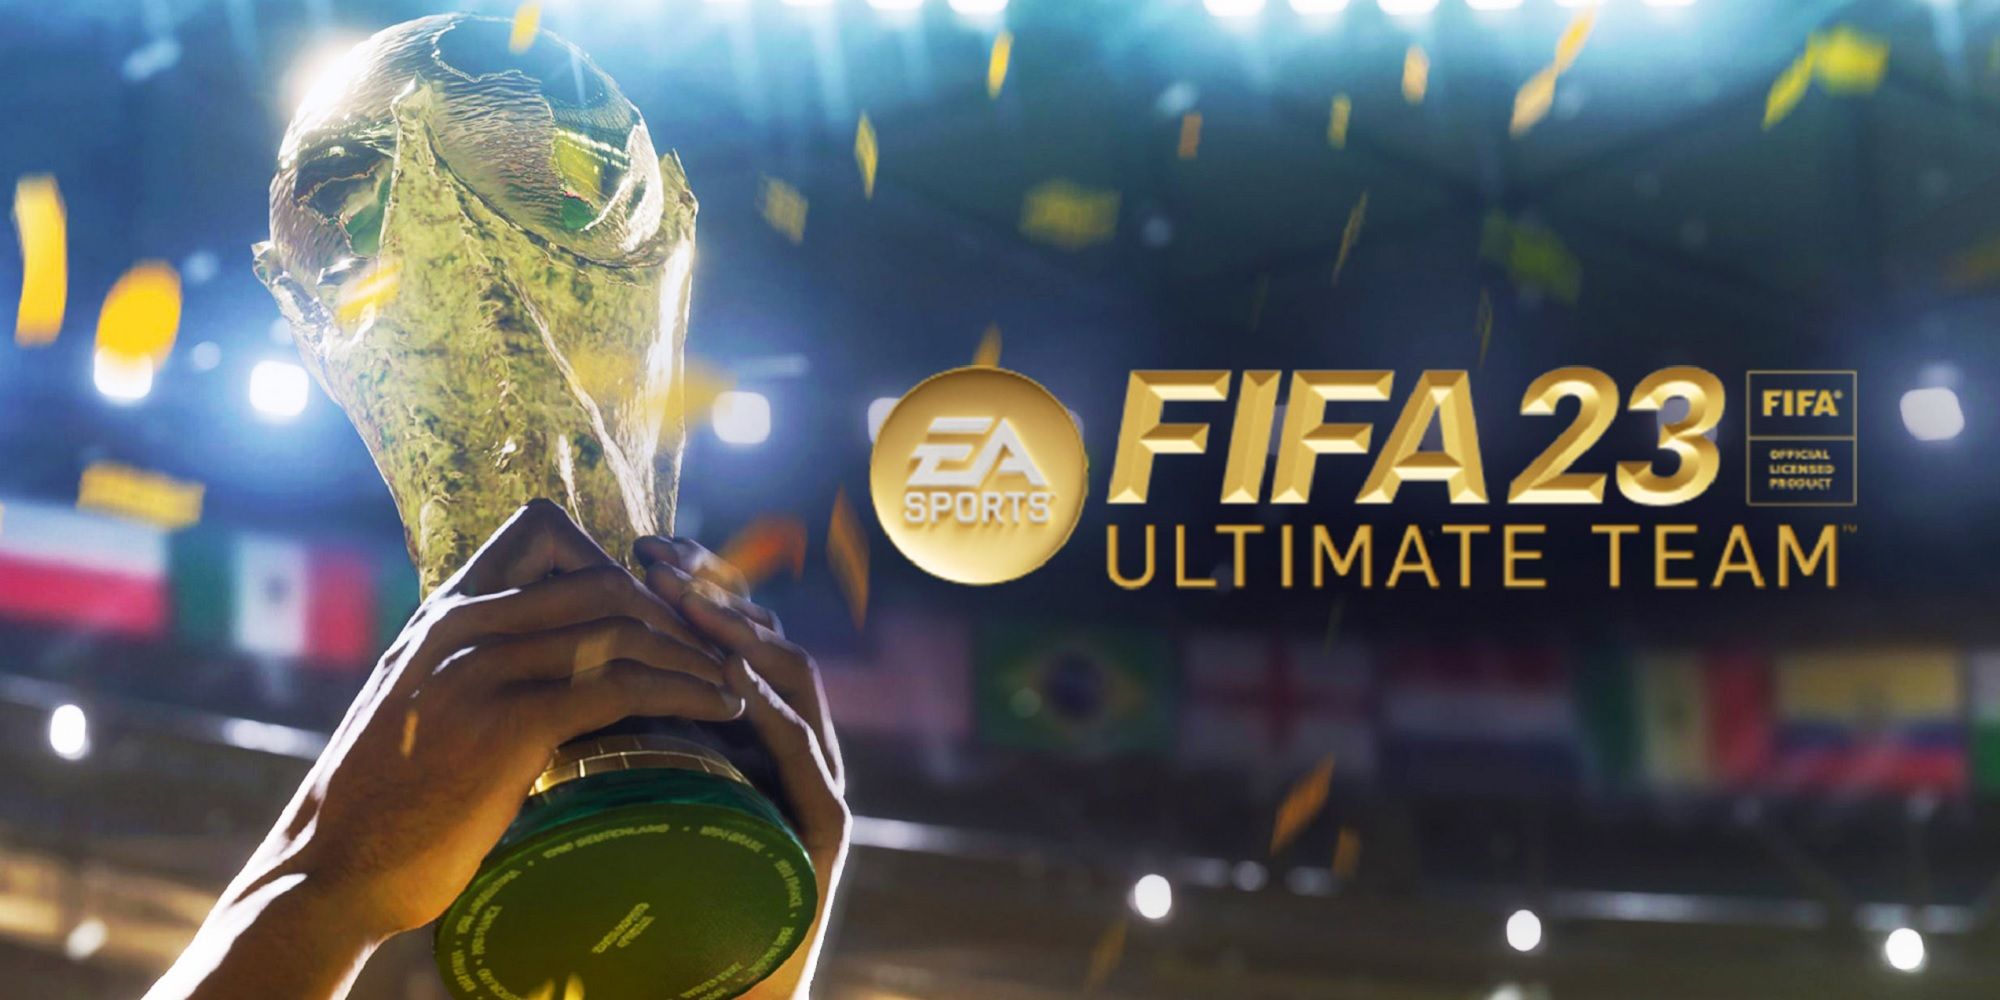 fifa ultimate team featured image trophy